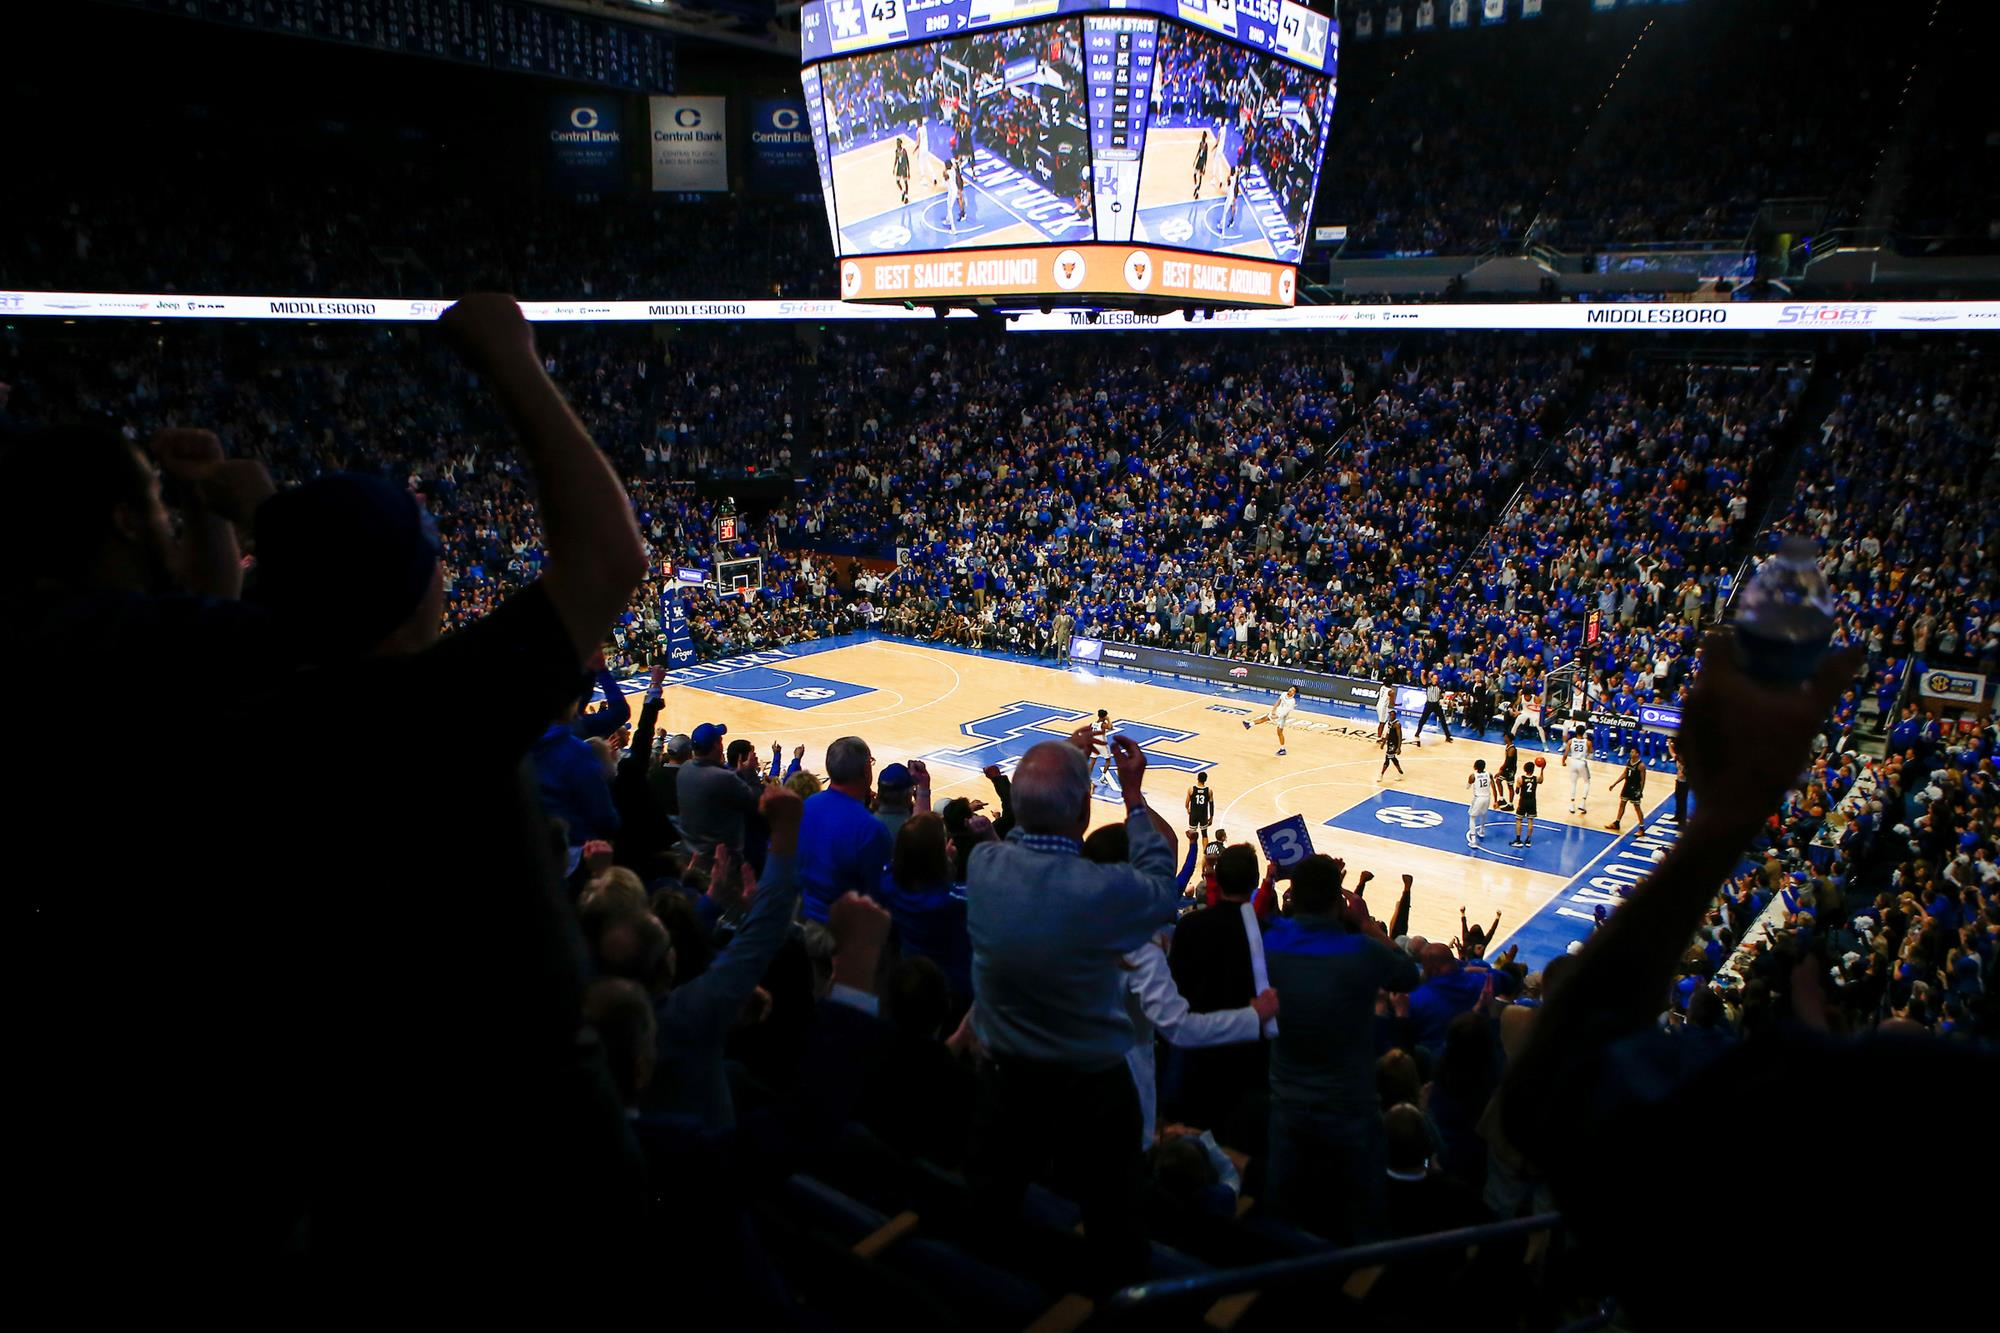 UK Men’s Basketball Adds Three More Games to 2020-21 Schedule